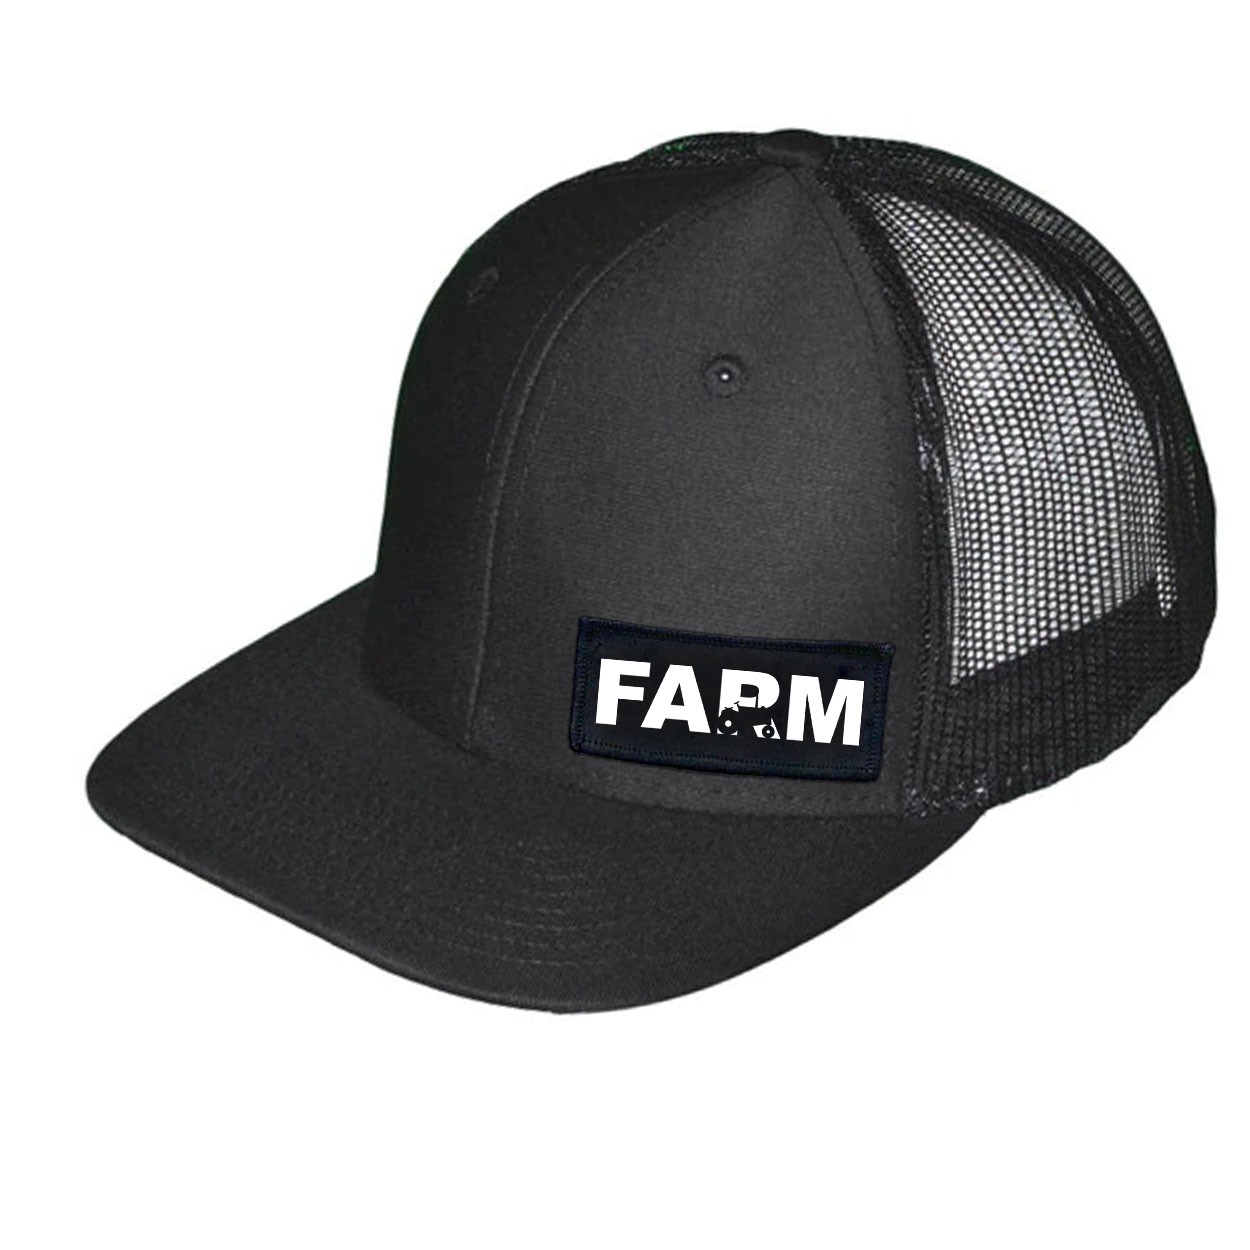 Farm Tractor Logo Night Out Woven Patch Snapback Trucker Hat Black